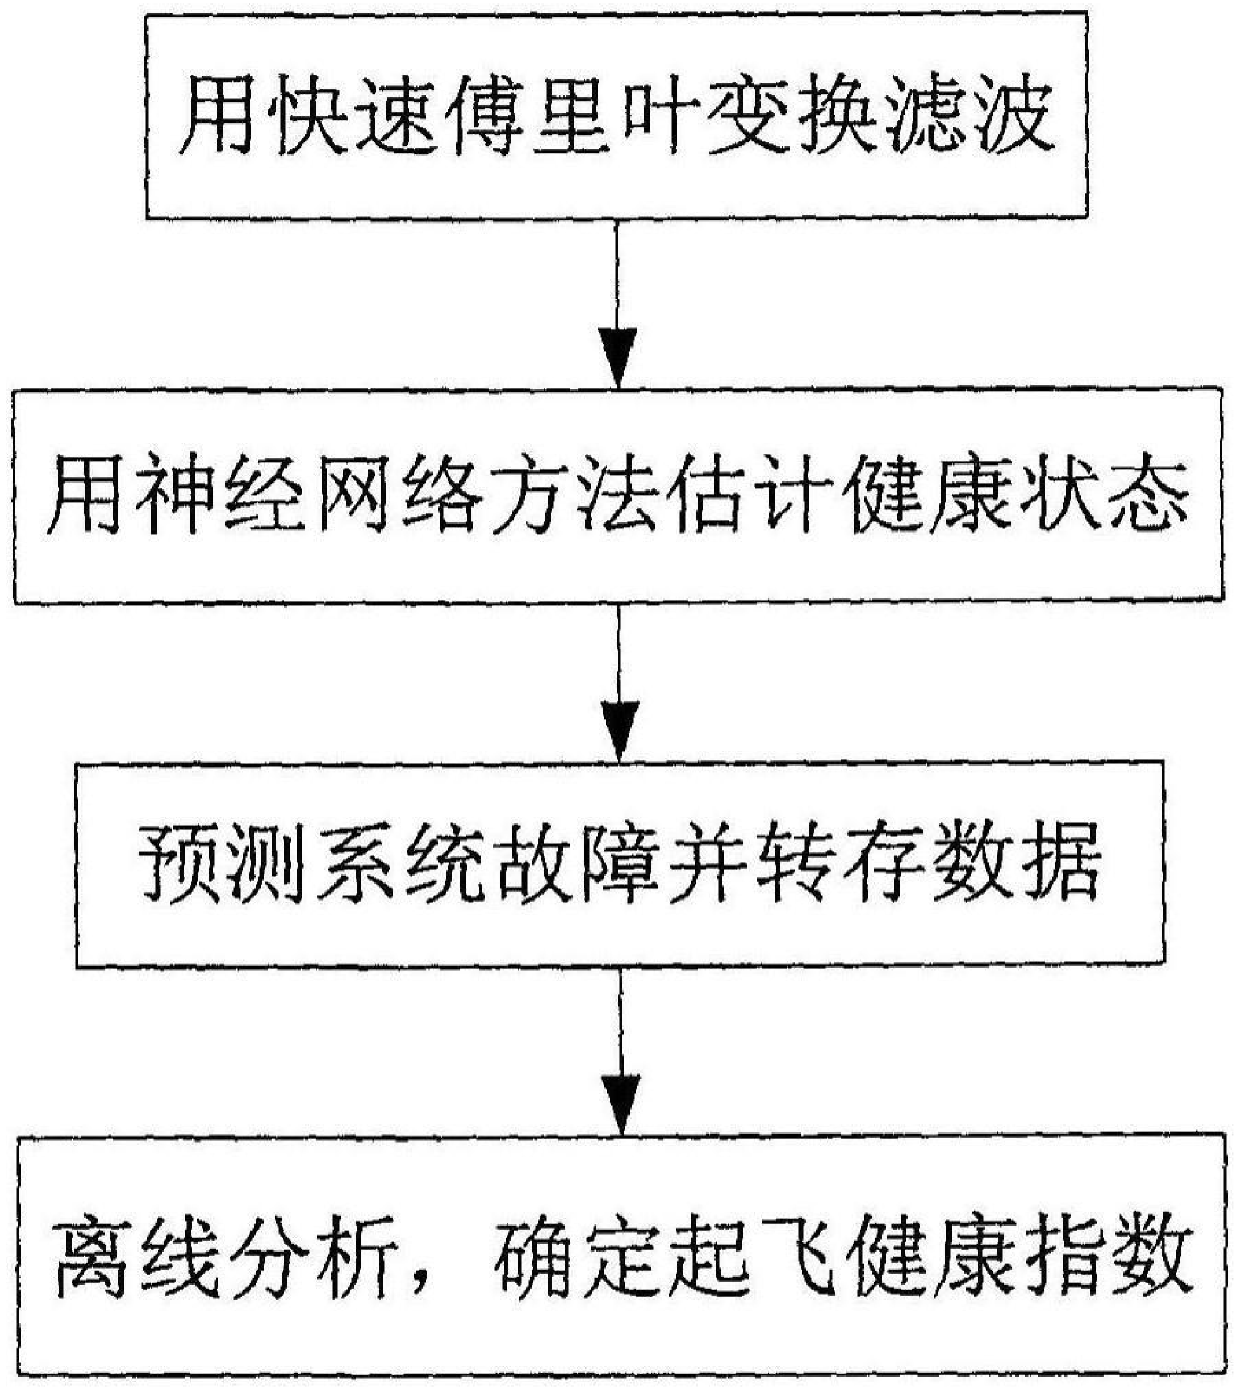 Aircraft Electromechanical System Health Management Method Based on Power Line Spread Spectrum Carrier